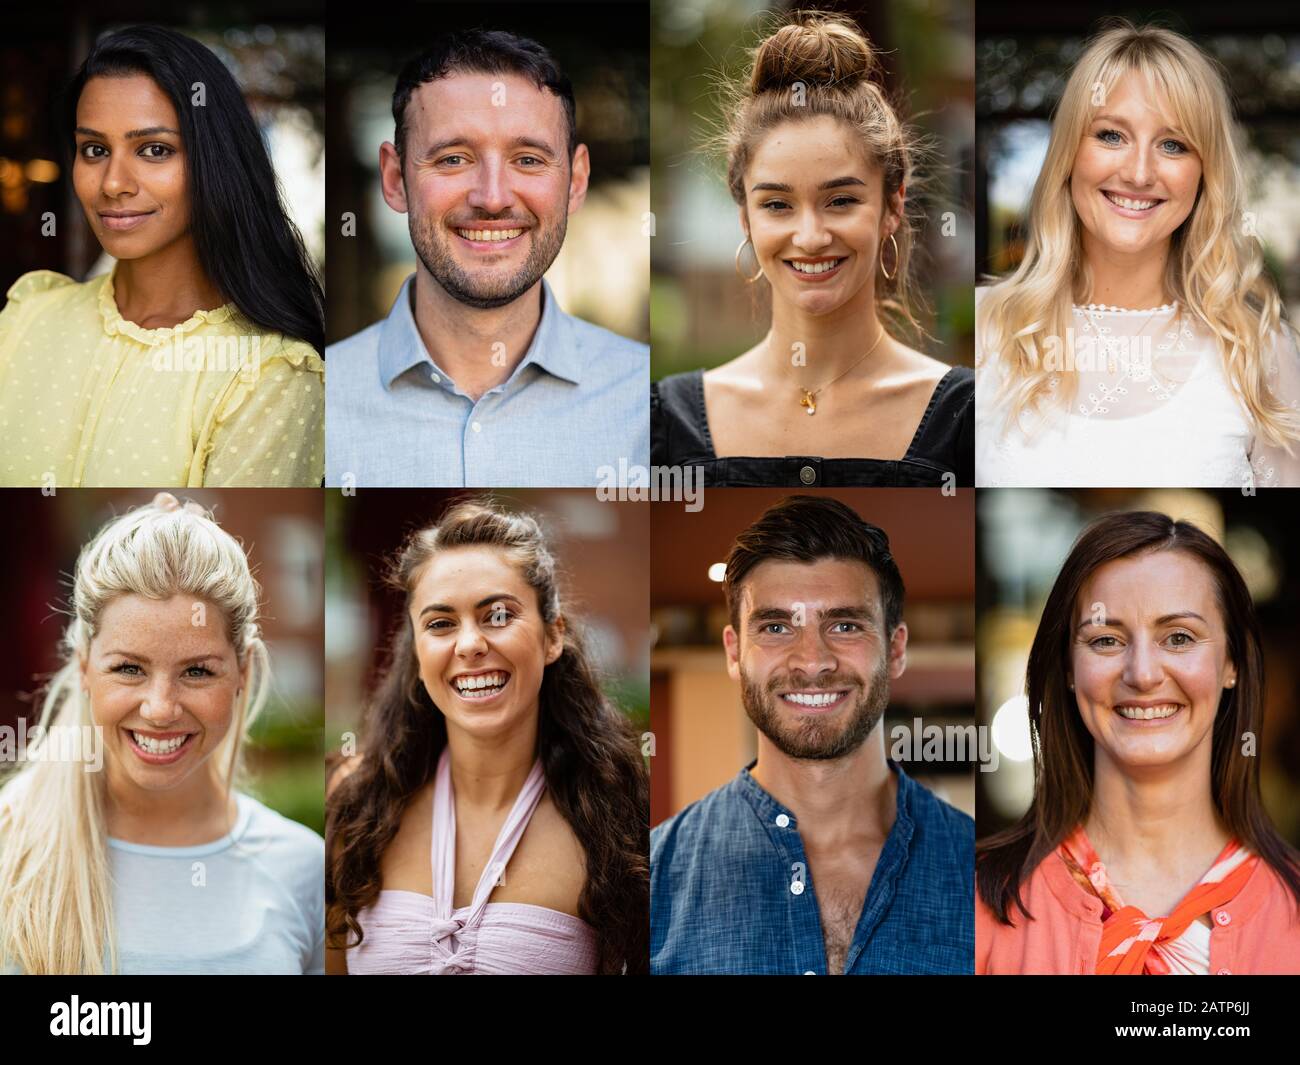 A headshot portrait of adults only in a digital composite montage. Stock Photo